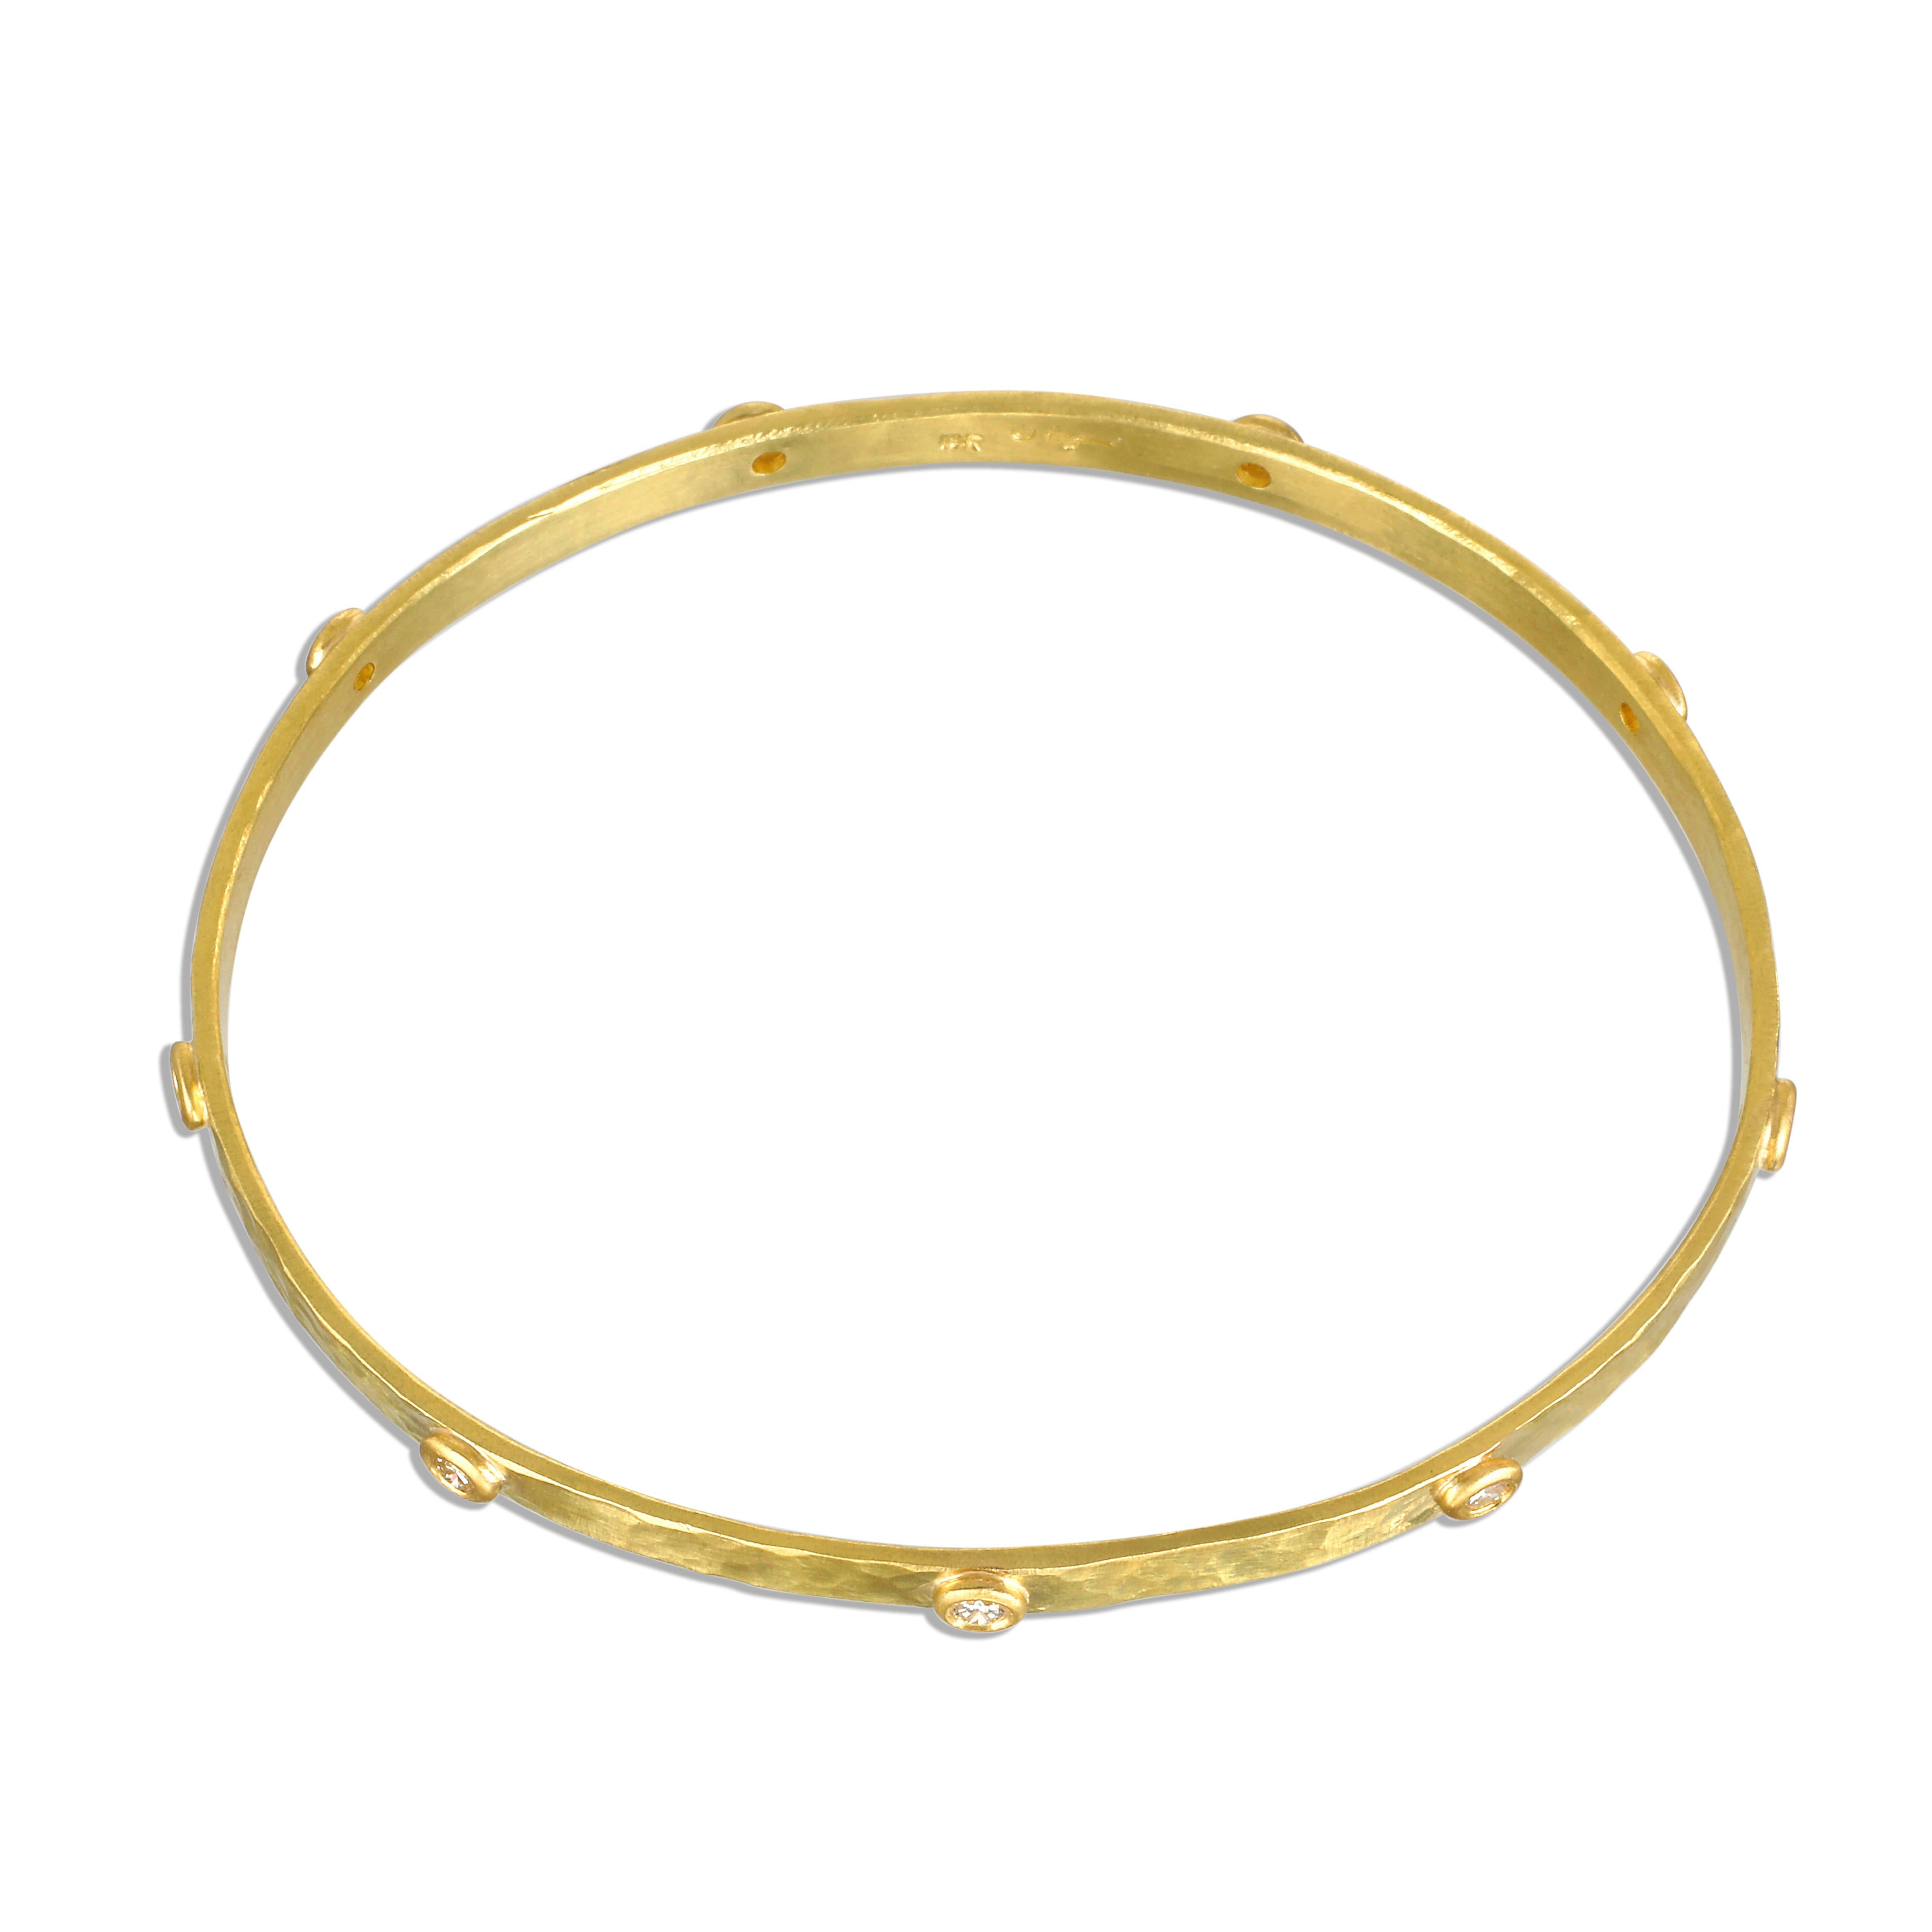 Handcrafted in 18 karat gold, Faye Kim’s modern design incorporates bezel-set diamonds into this hammered oval bangle bracelet that is both organic and timeless in feel. Exuding an understated elegance, this bangle can be worn alone or stacked with